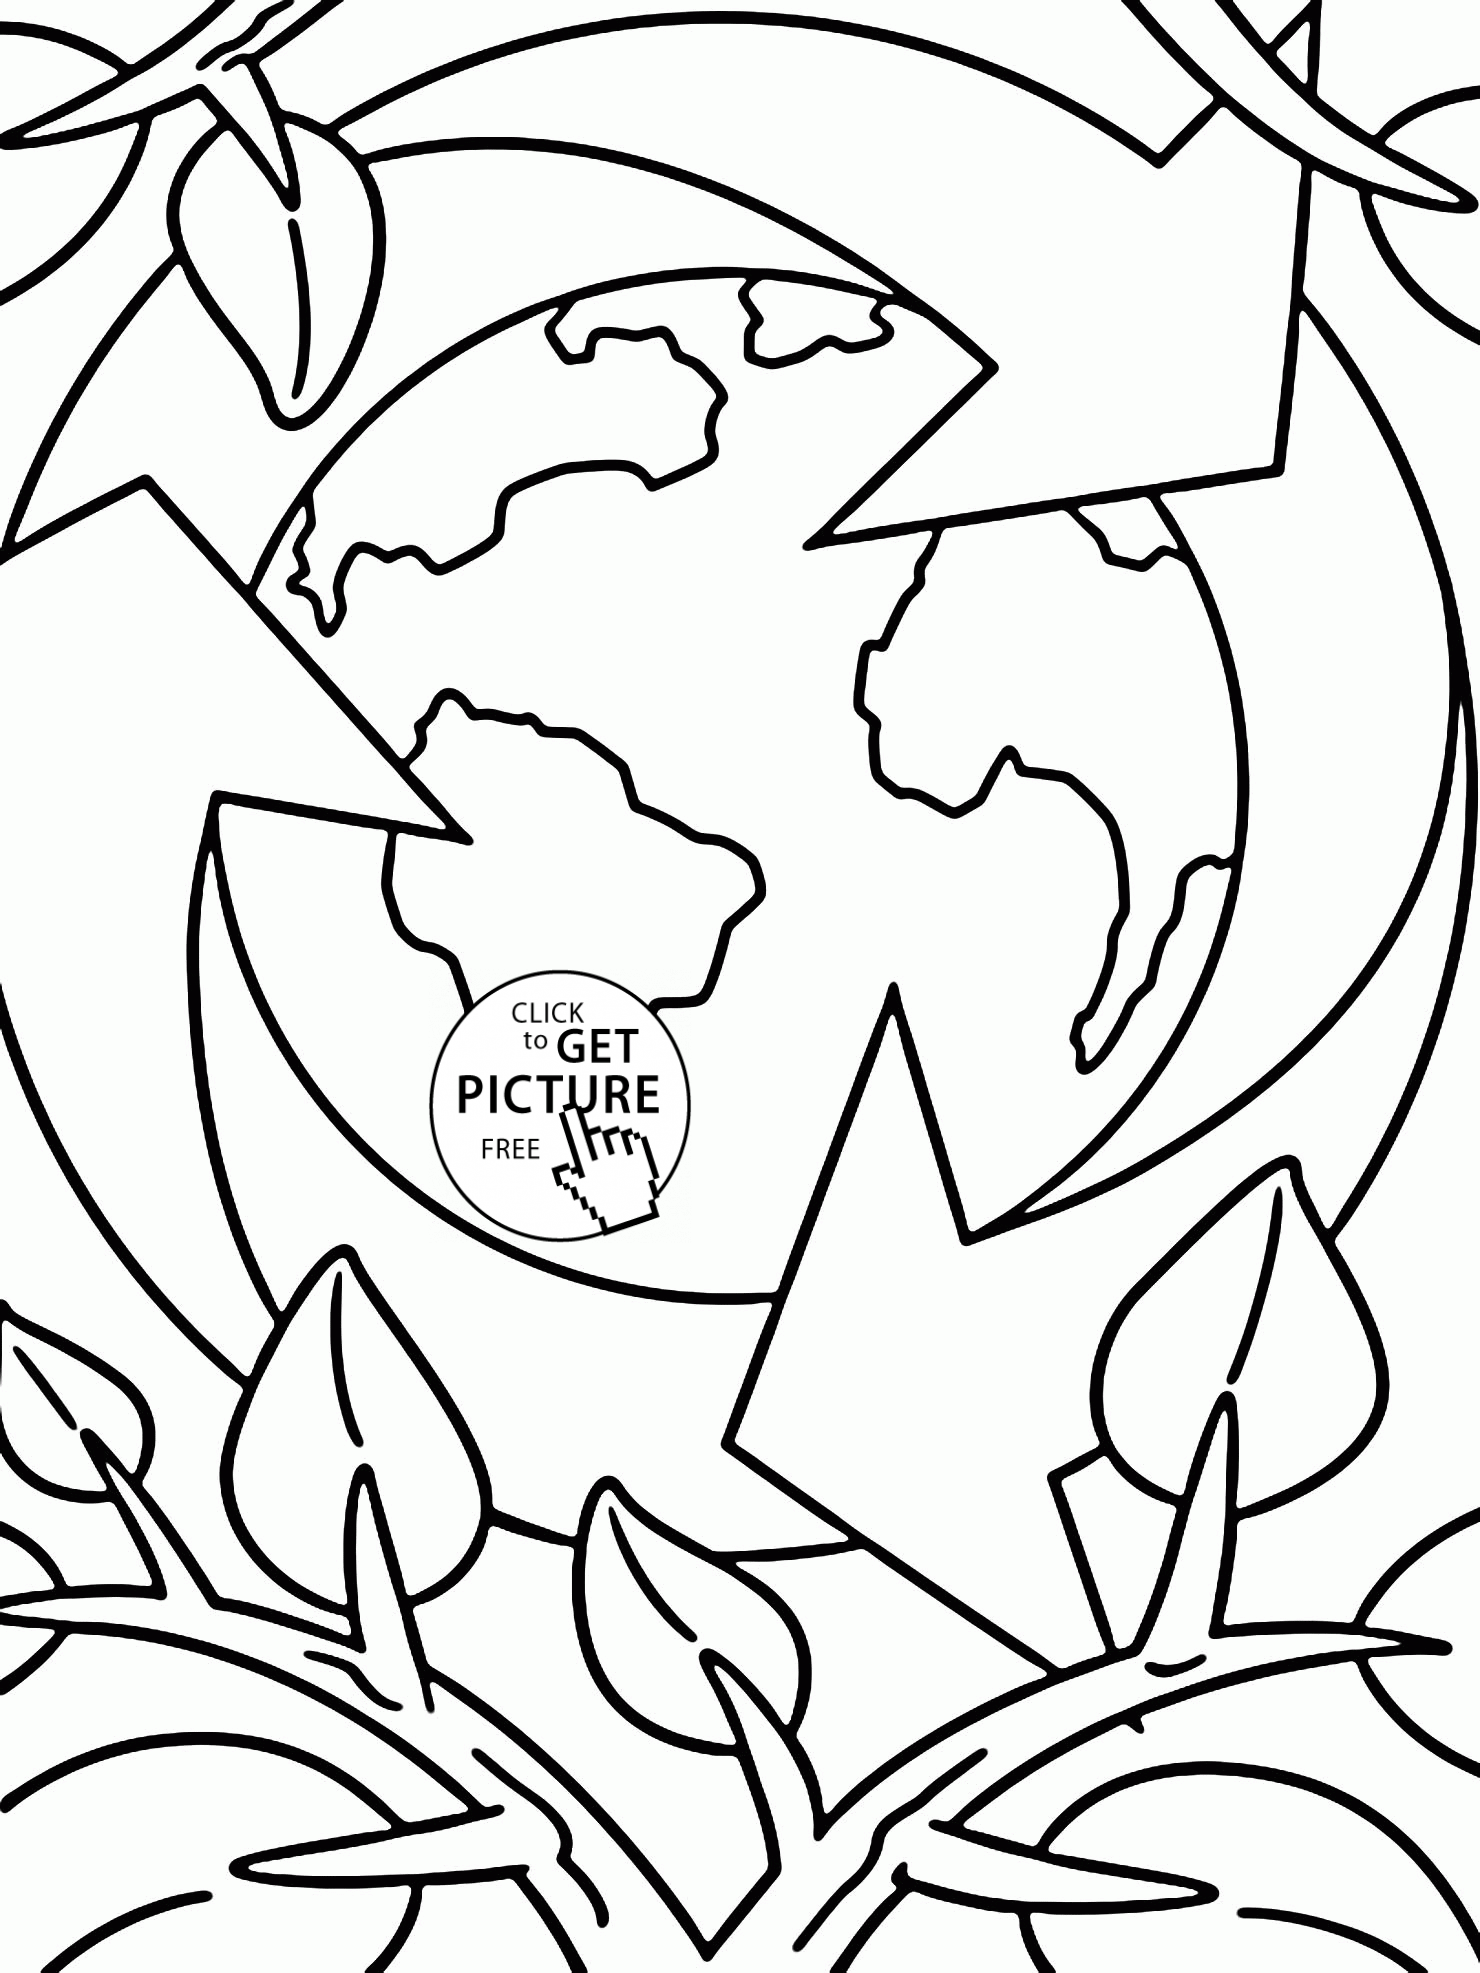 Save the Our Earth - Earth Day coloring page for kids, coloring ...